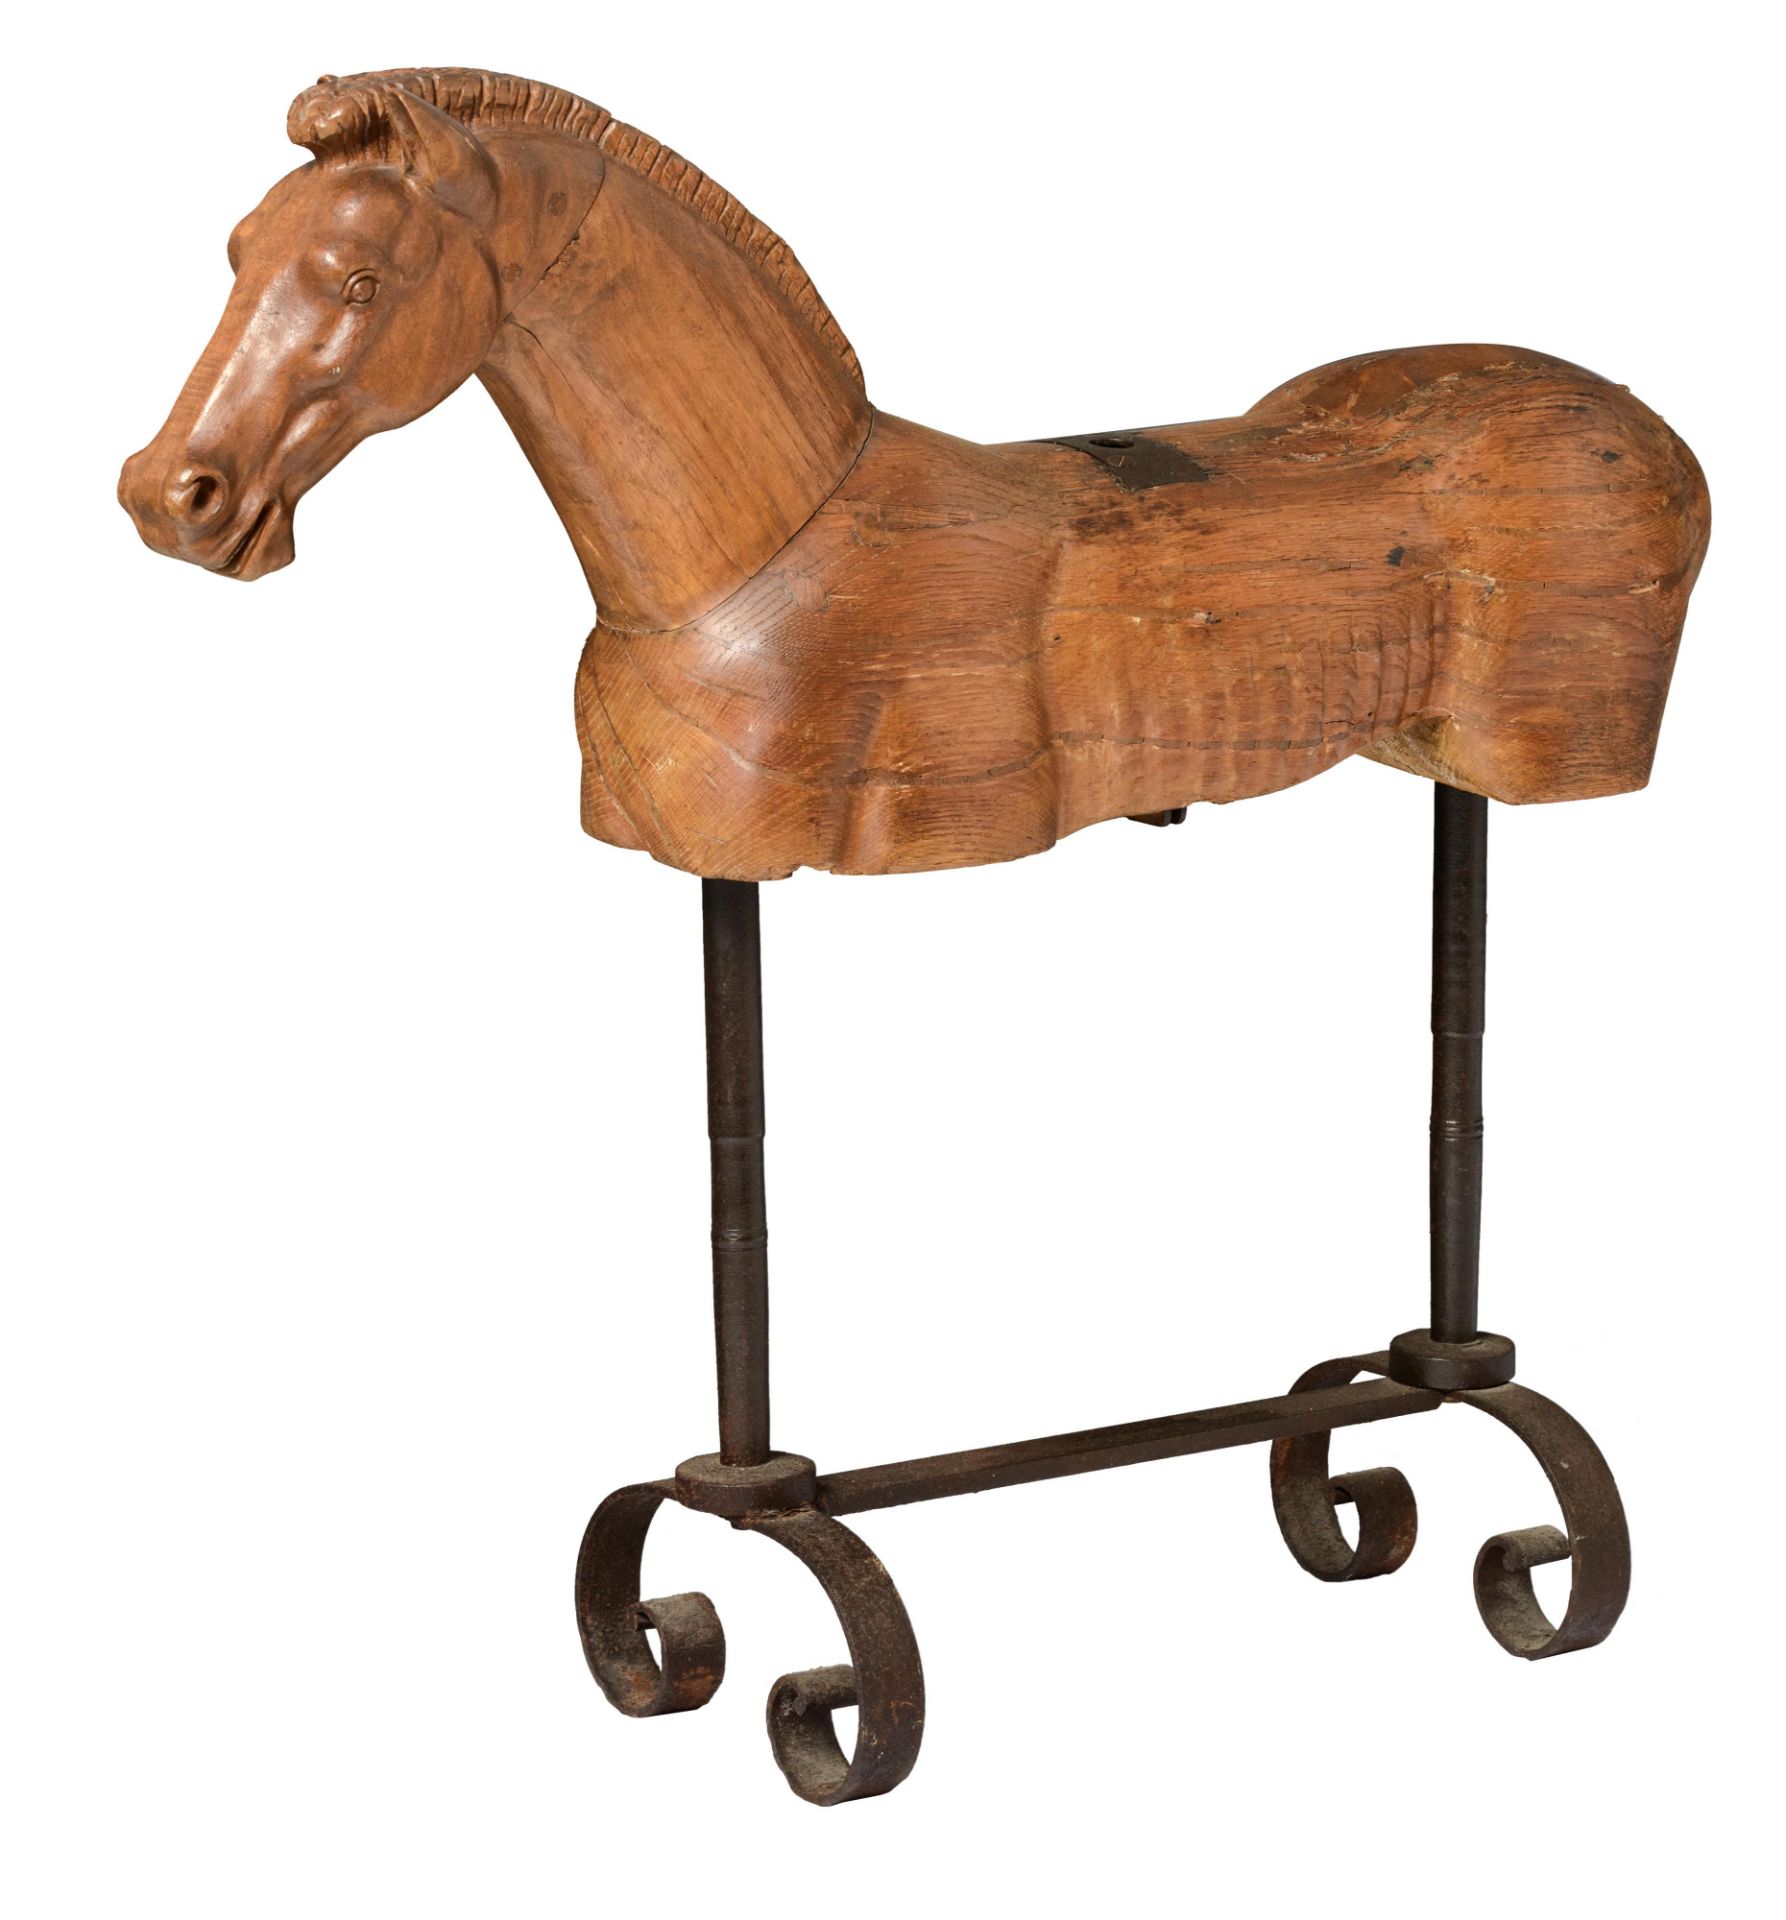 A carved oak horse on a wrought iron stand, H 92 - W 97 cm